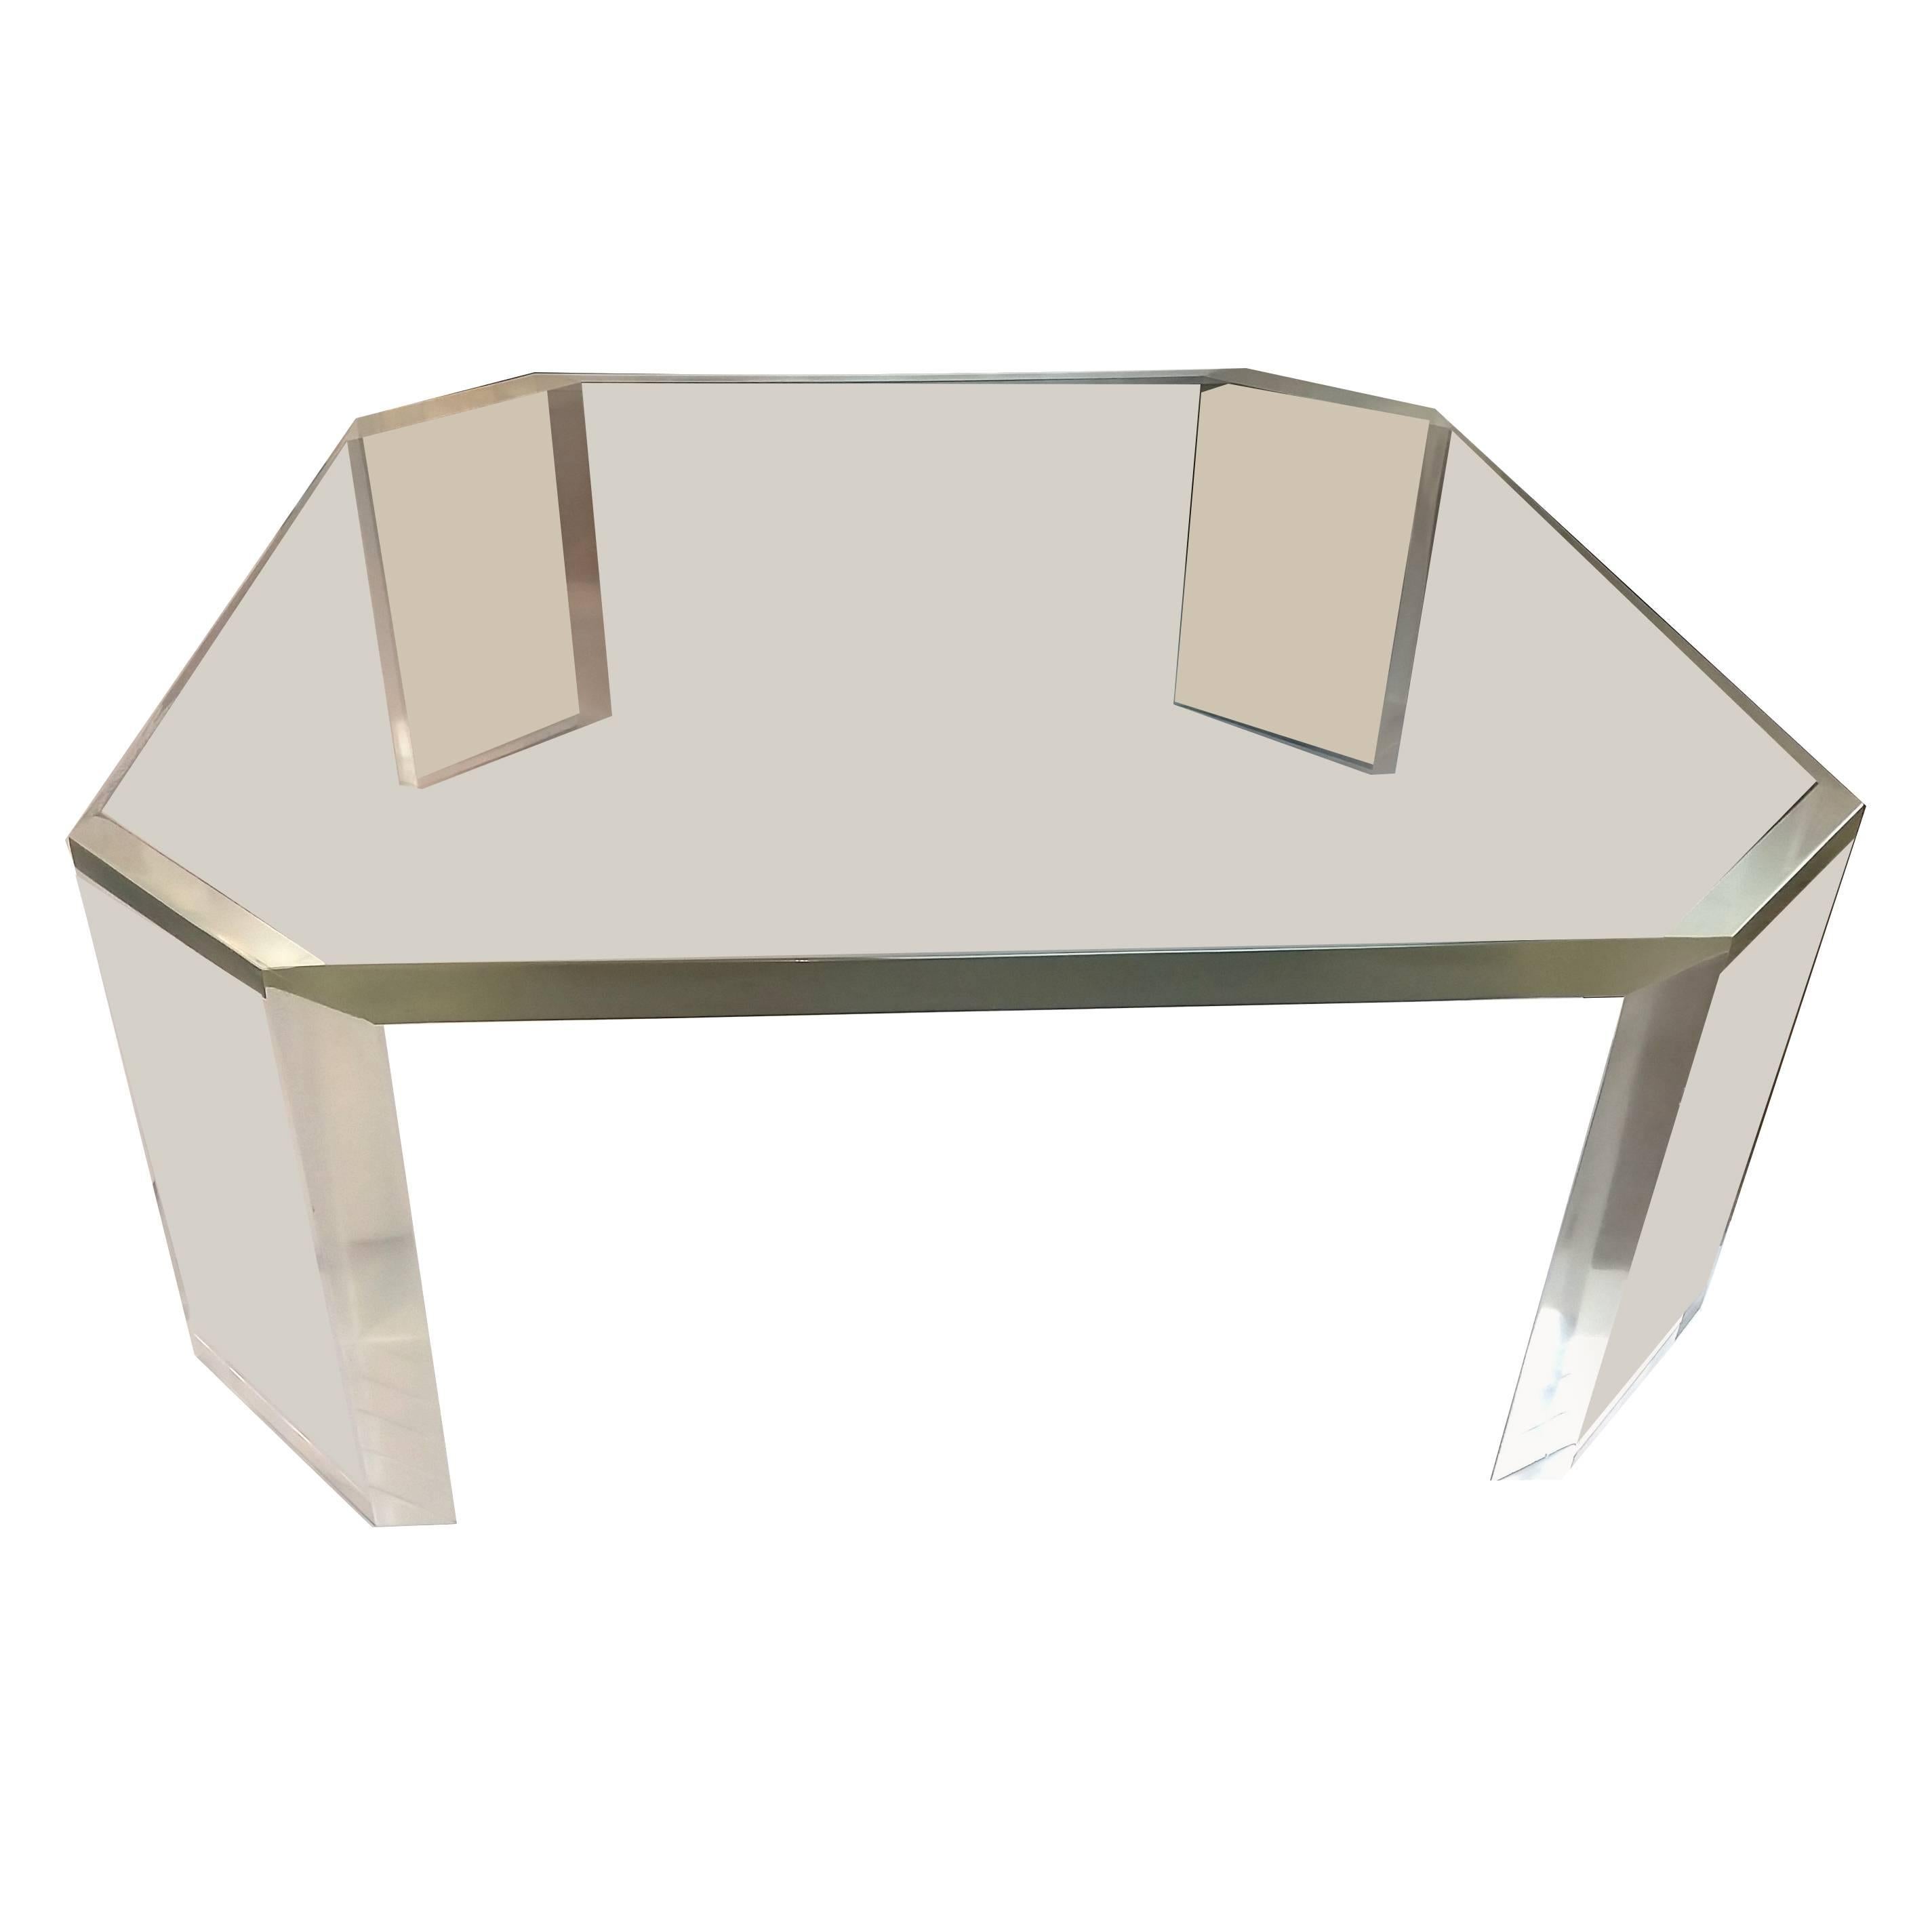 Lucite Coffee Table by Charles Hollis Jones "L'AMI" Model 505 c. 1975 For Sale